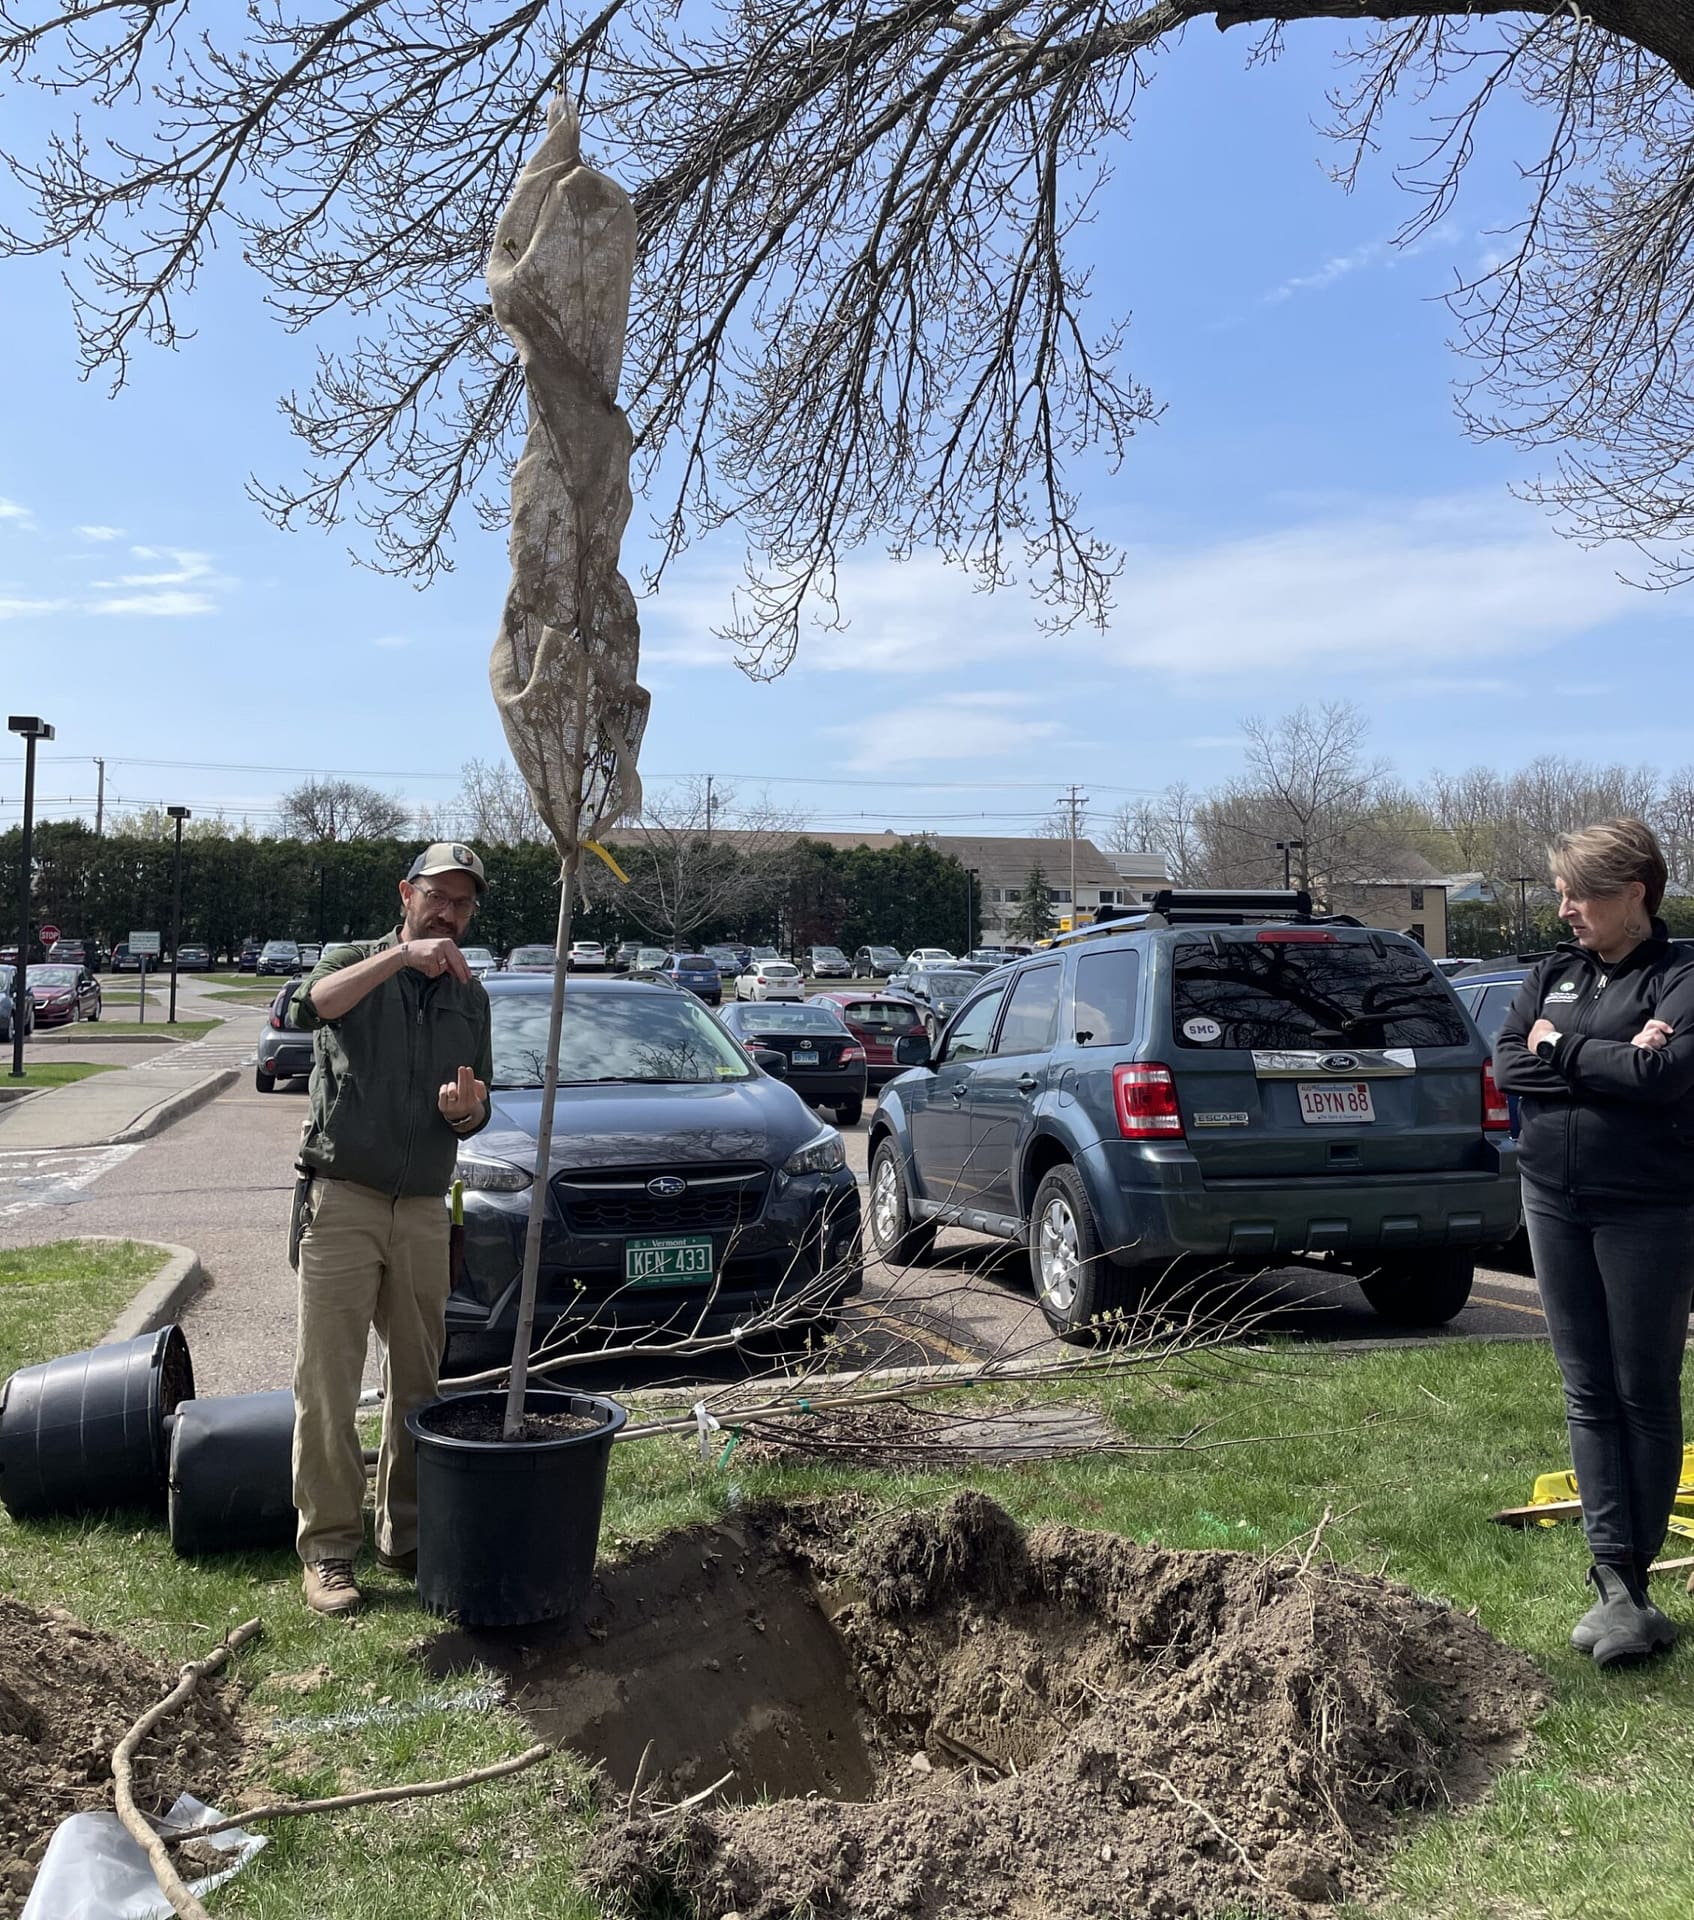 Professor Trevien Stanger leads a group of campus community members to plant a tree on Earth Day.